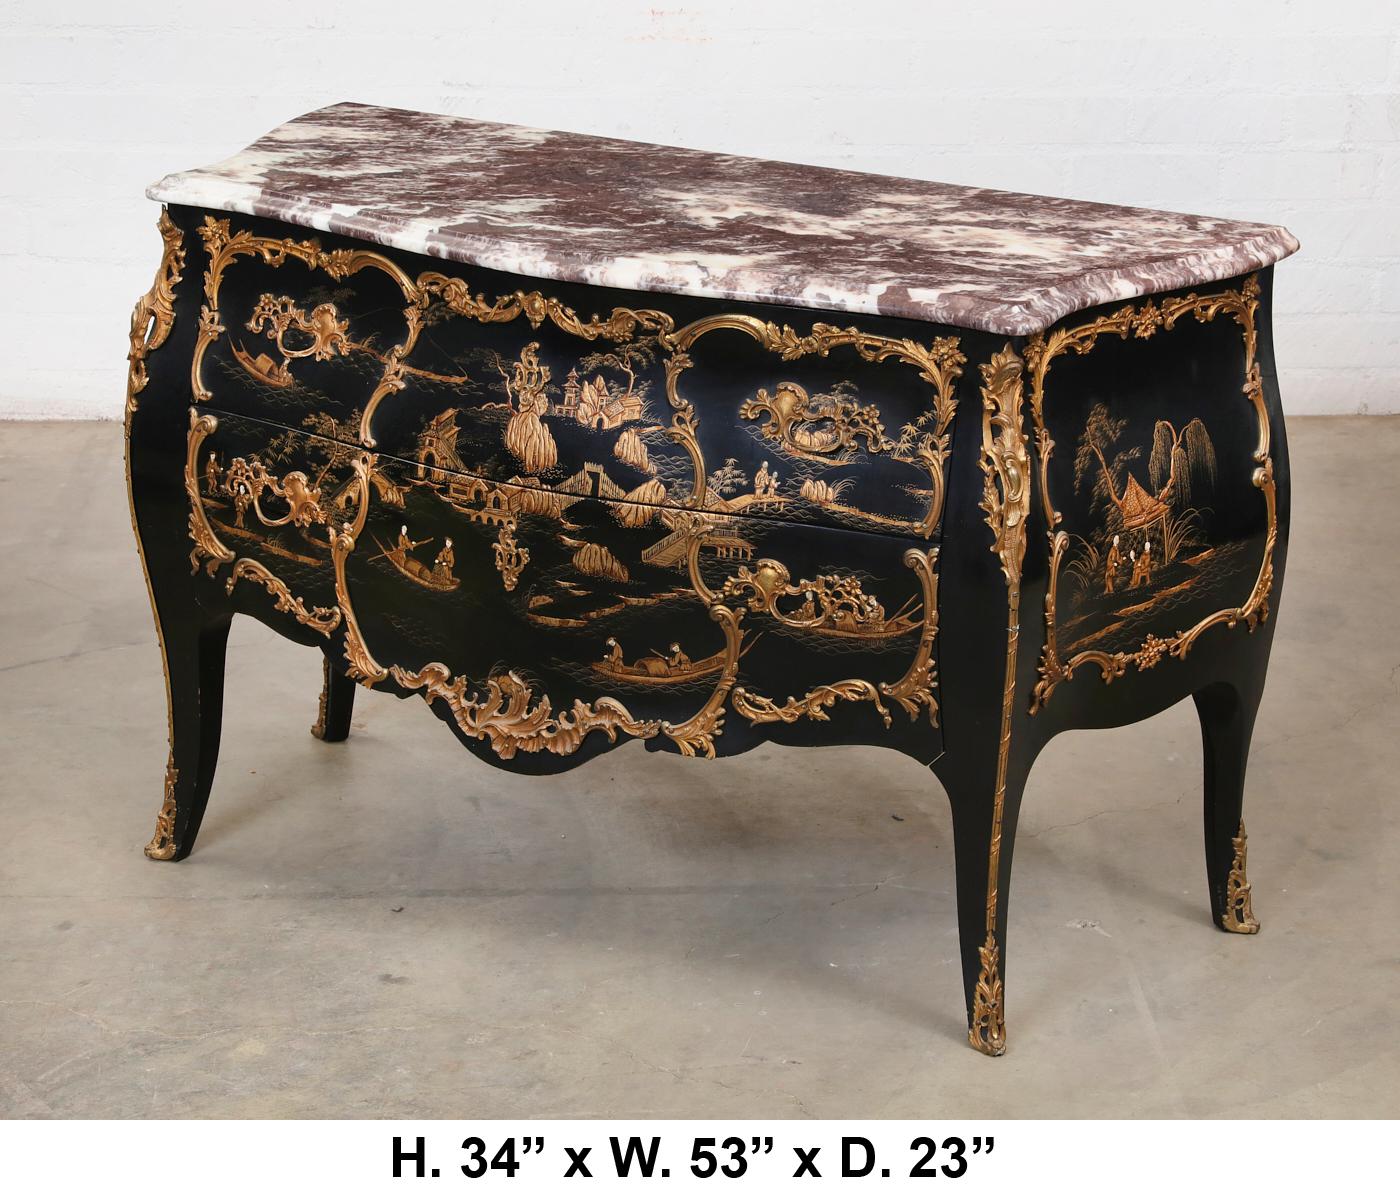 Imposing Louis XV style bronze mounted black Chinoiserie lacquered commode, mid 20th century
The beautiful purple and white serpentine fronted and moulded marble top is over bombe style commode with two long drawers, the front and sides are gilt